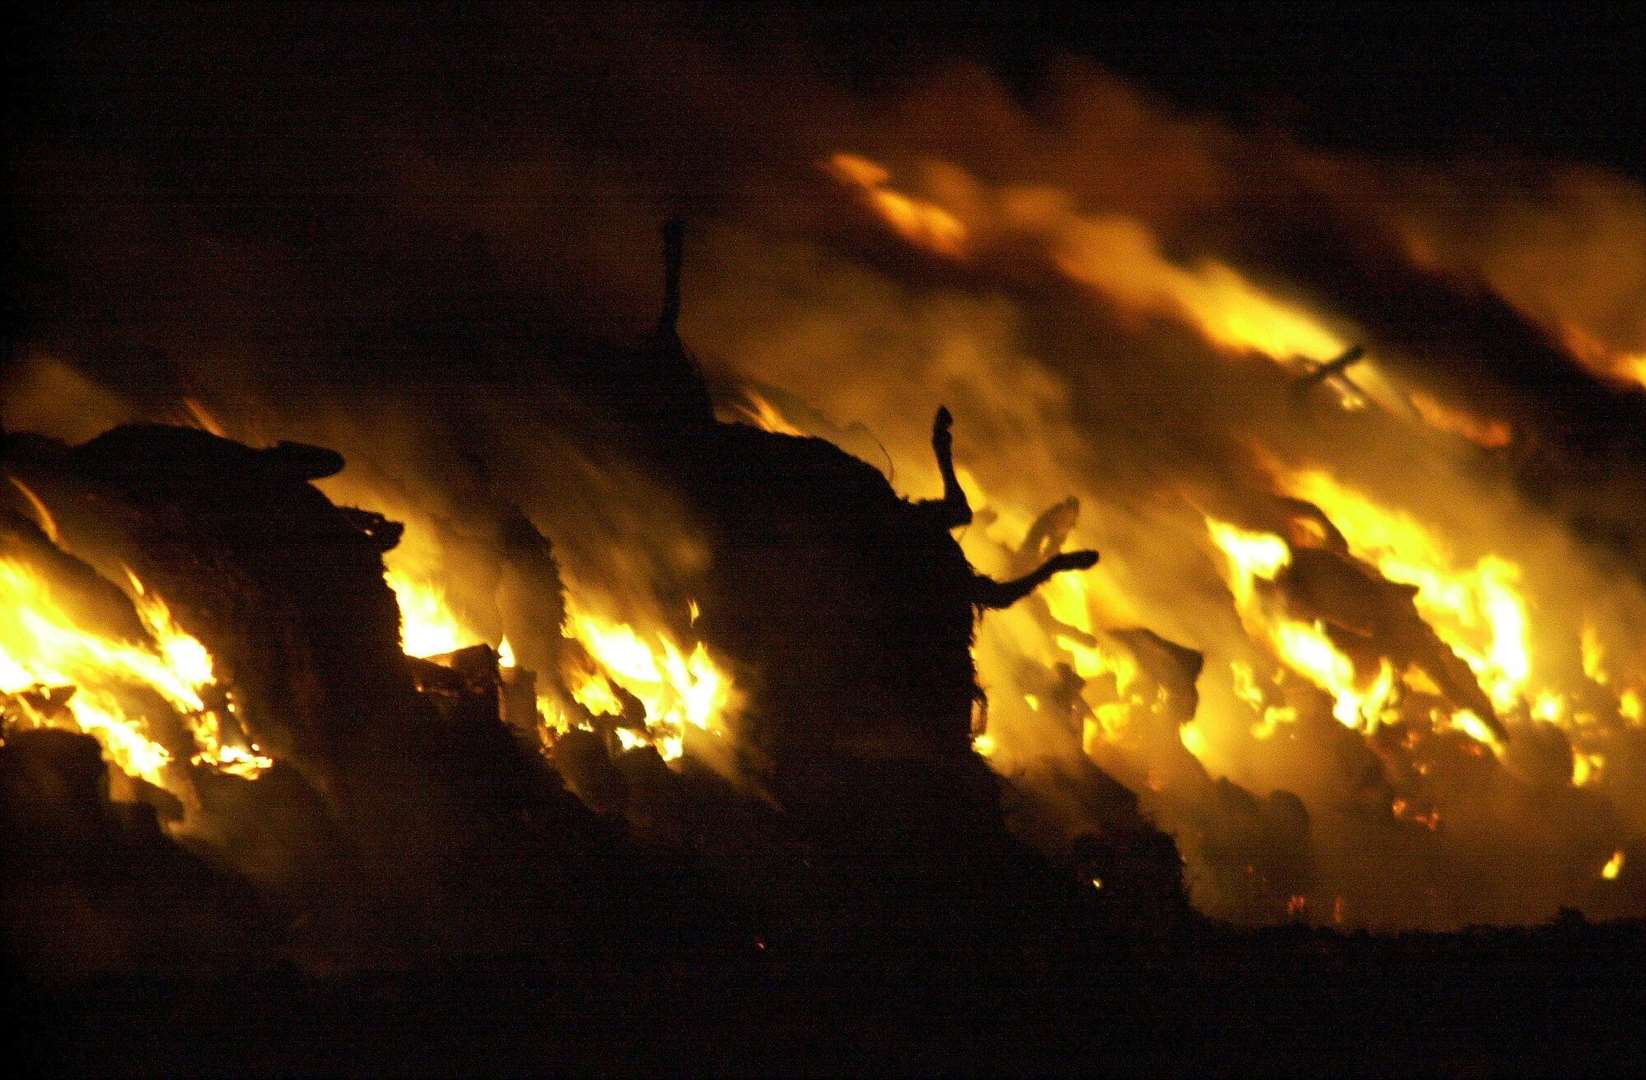 Sheep carcasses burn during the night in 2001